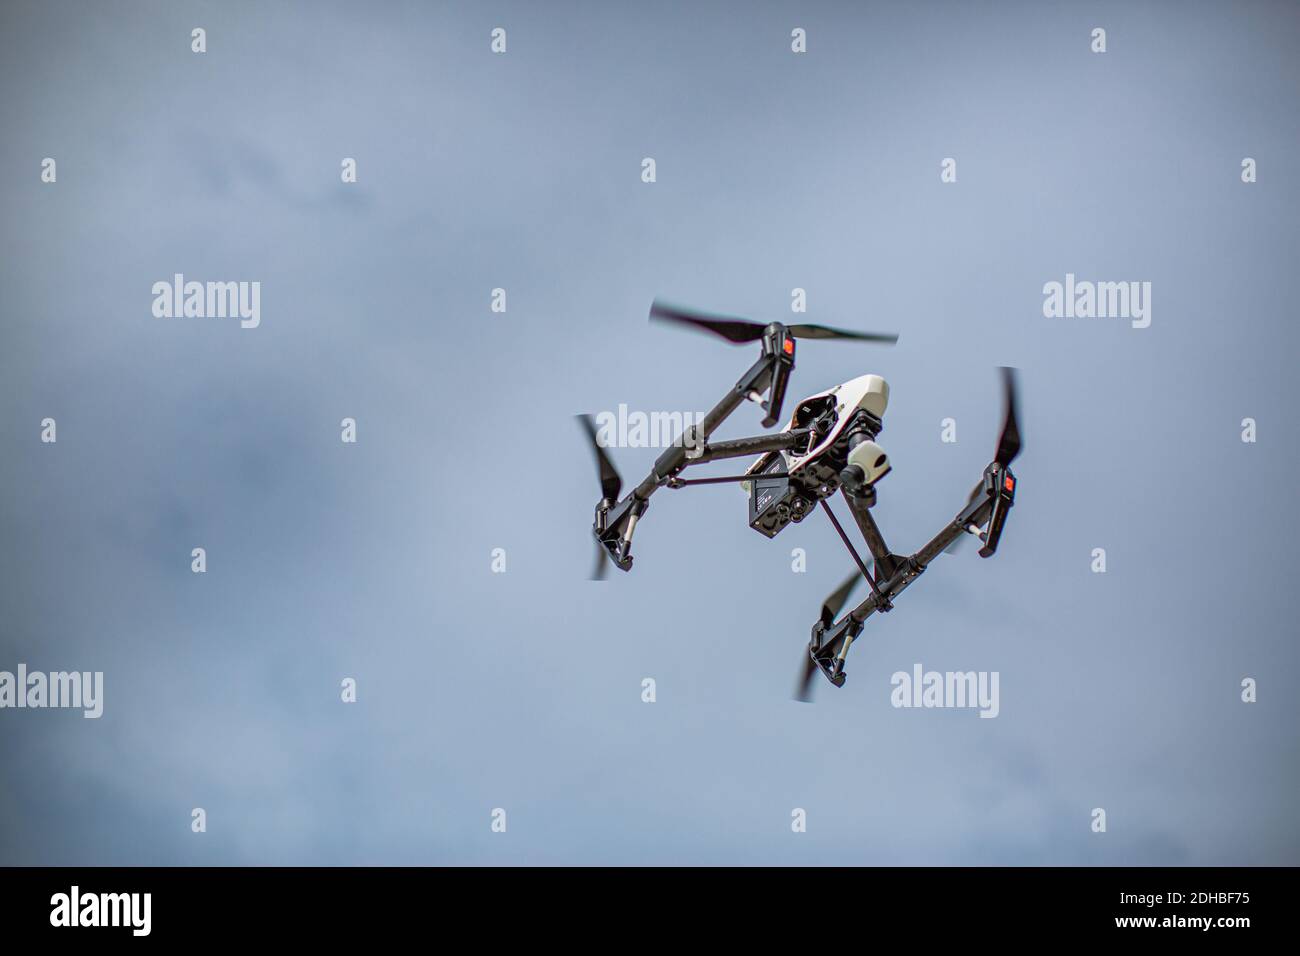 Flying drone on the sky. Drone with high resolution digital camera, photography and video, aerial view Stock Photo